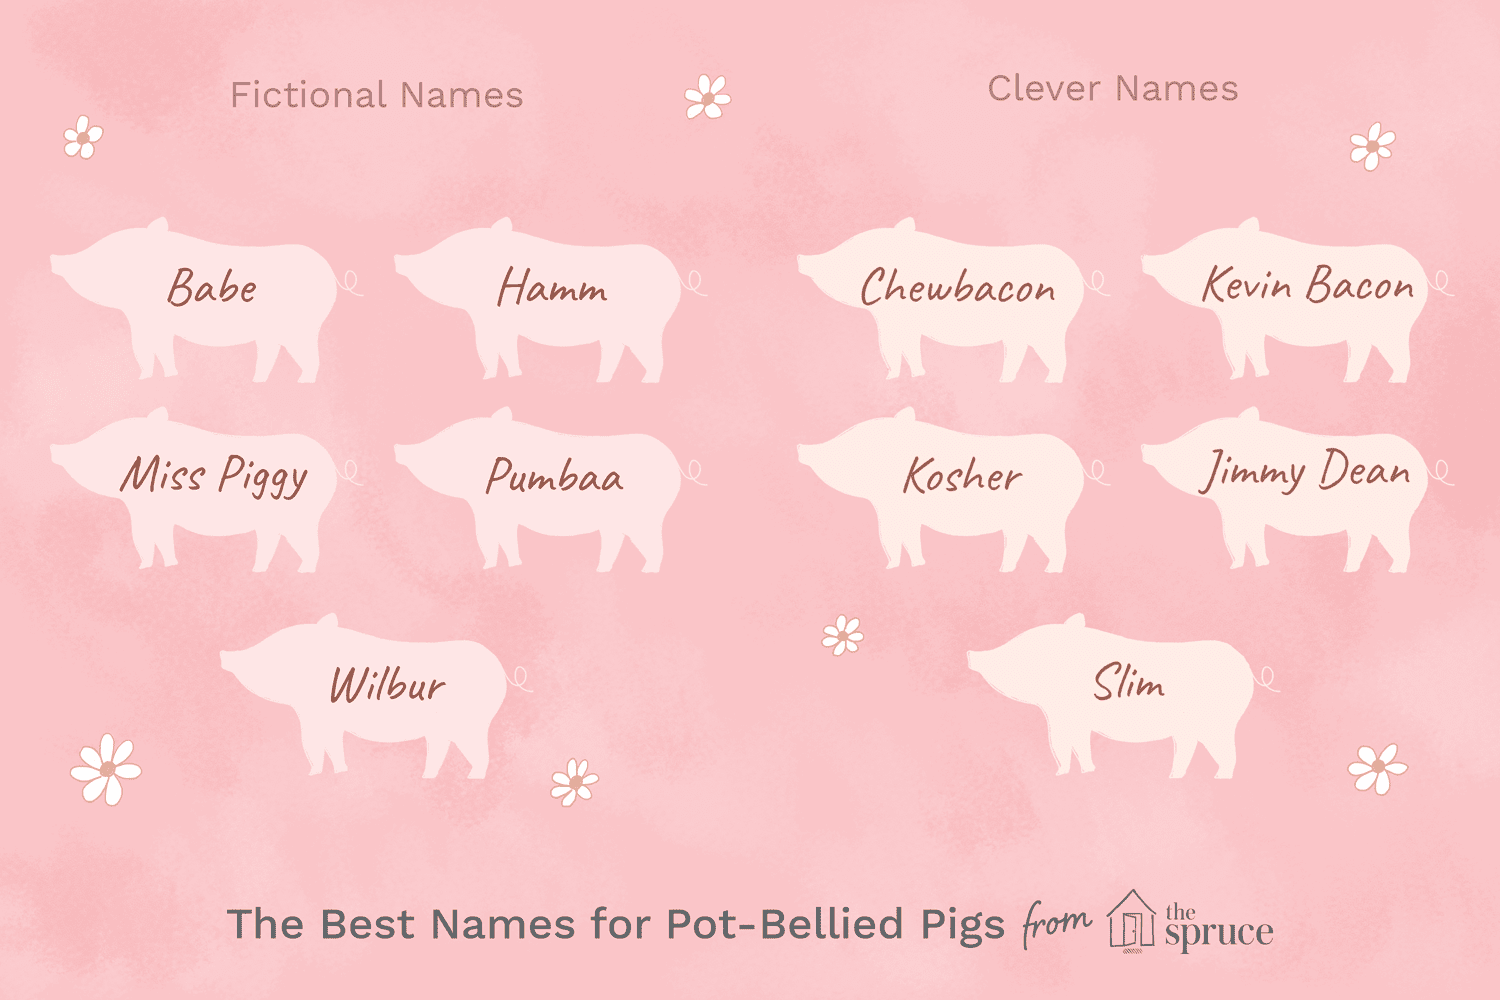 What is a cute name for a pet pig?